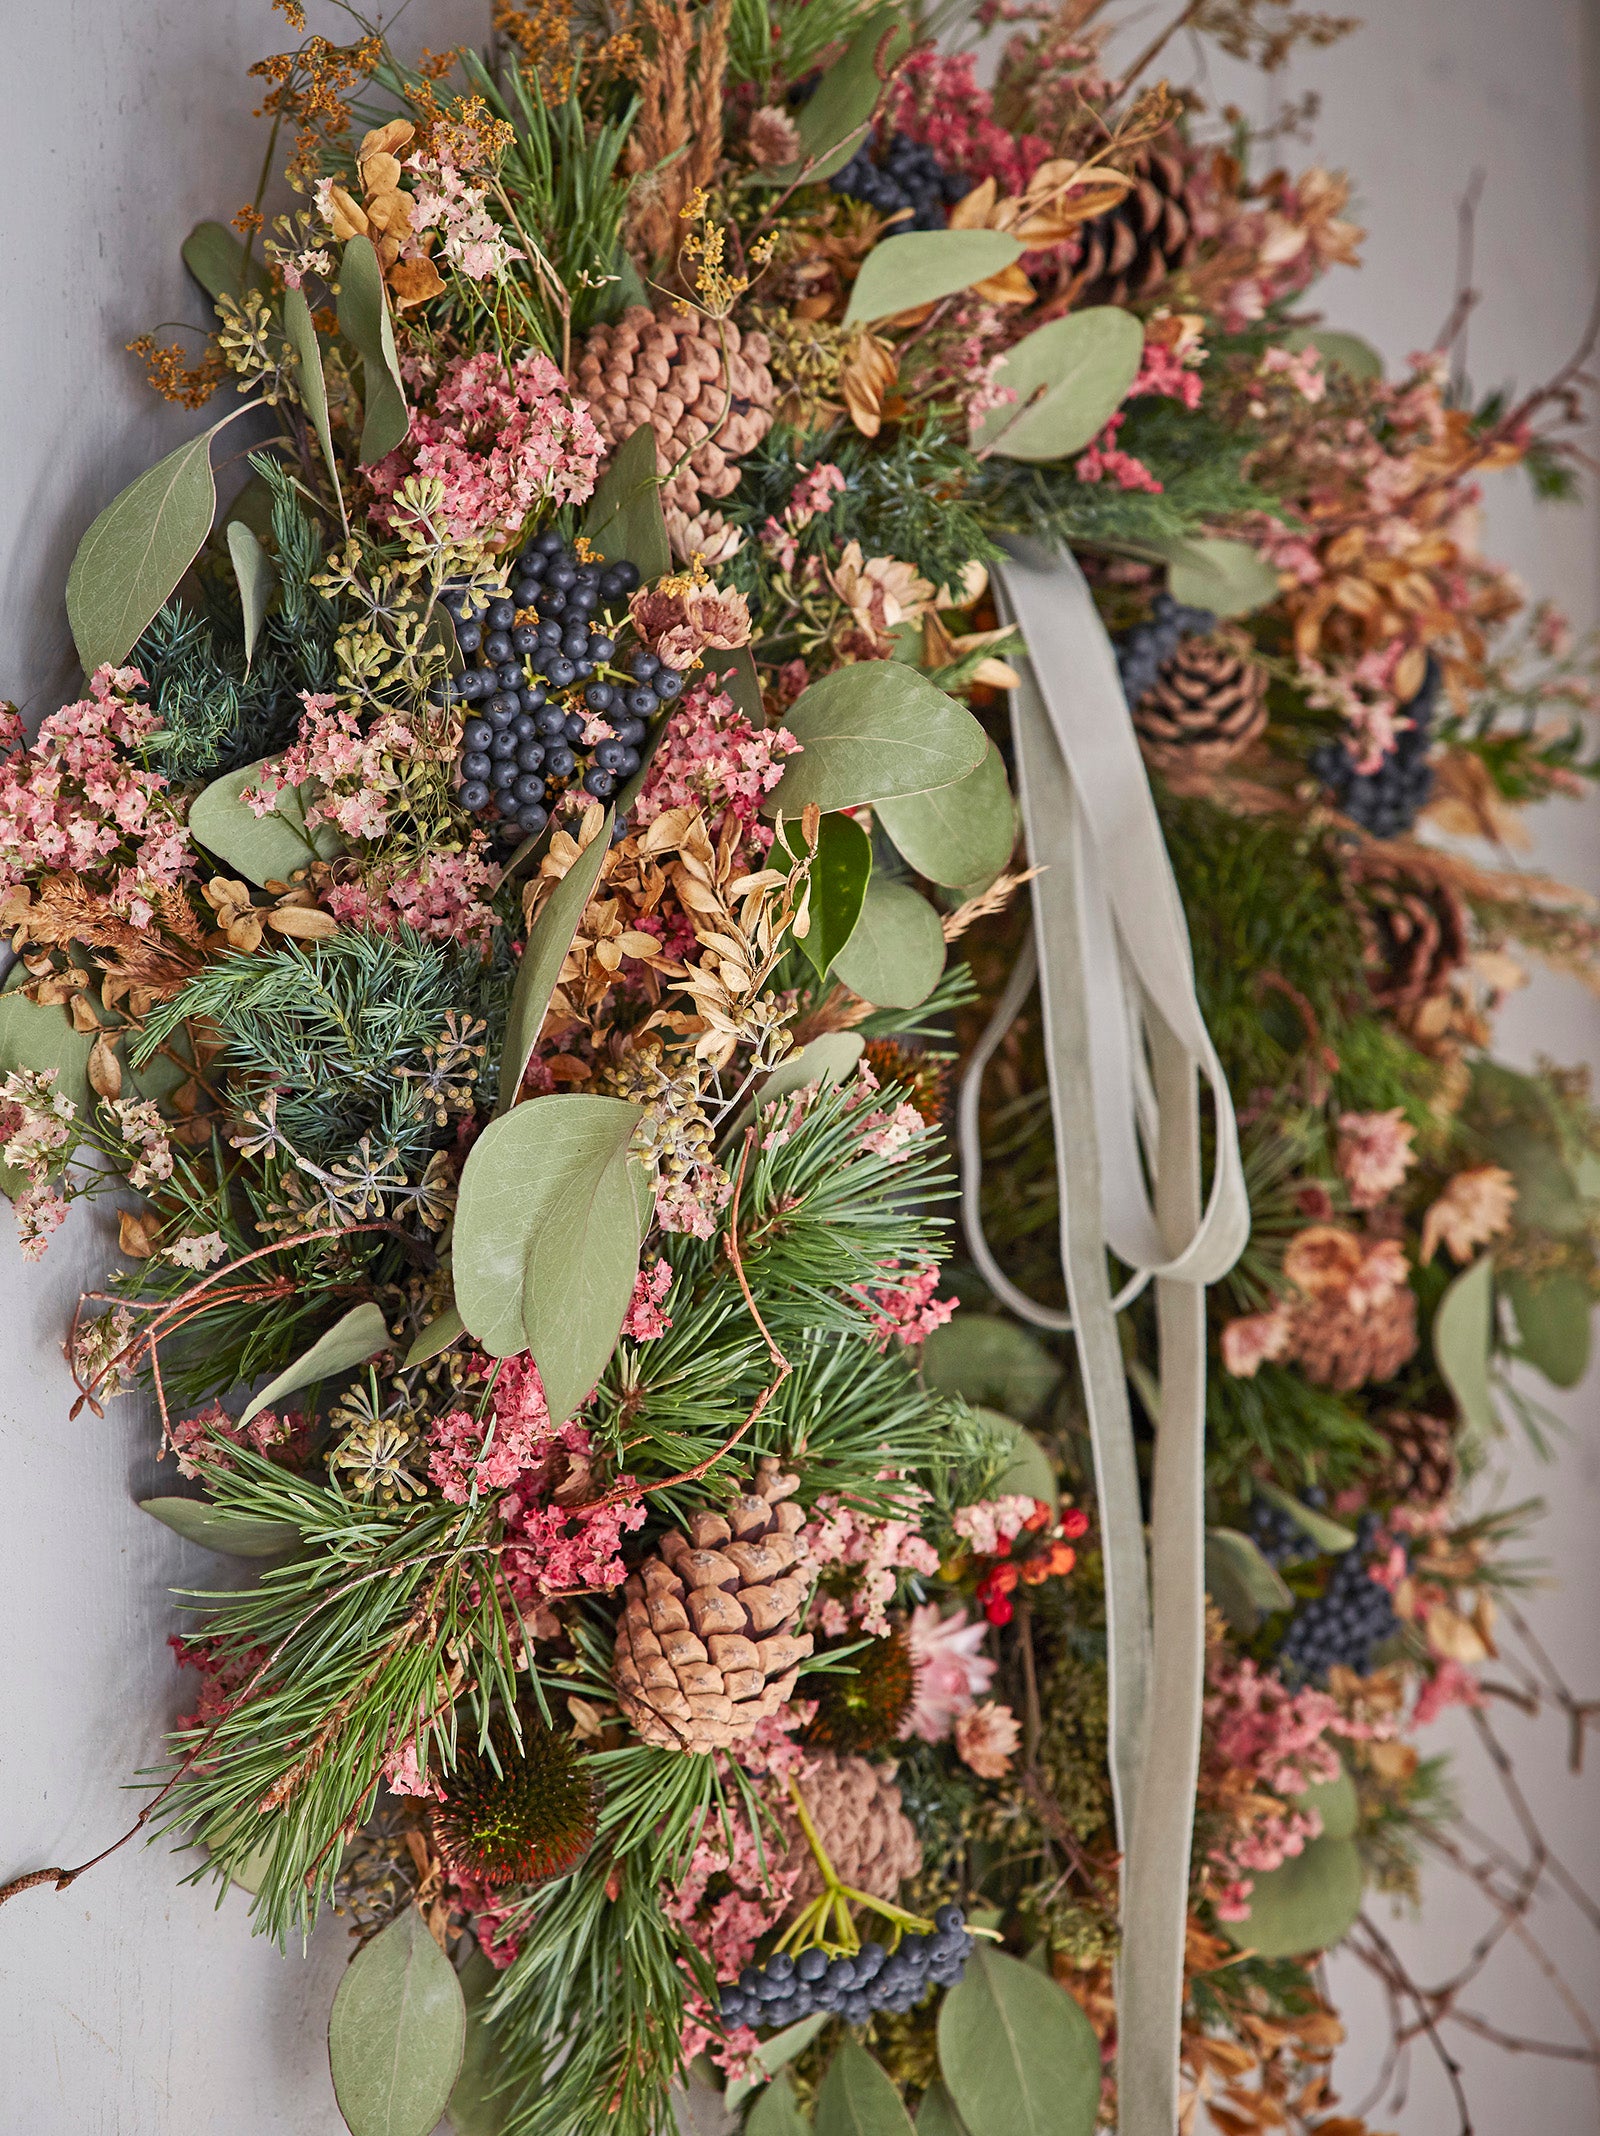 A Christmas wreath made of dried and fresh foliage, seed heads and pinecones, green leaves, black berries and silver ribbons.